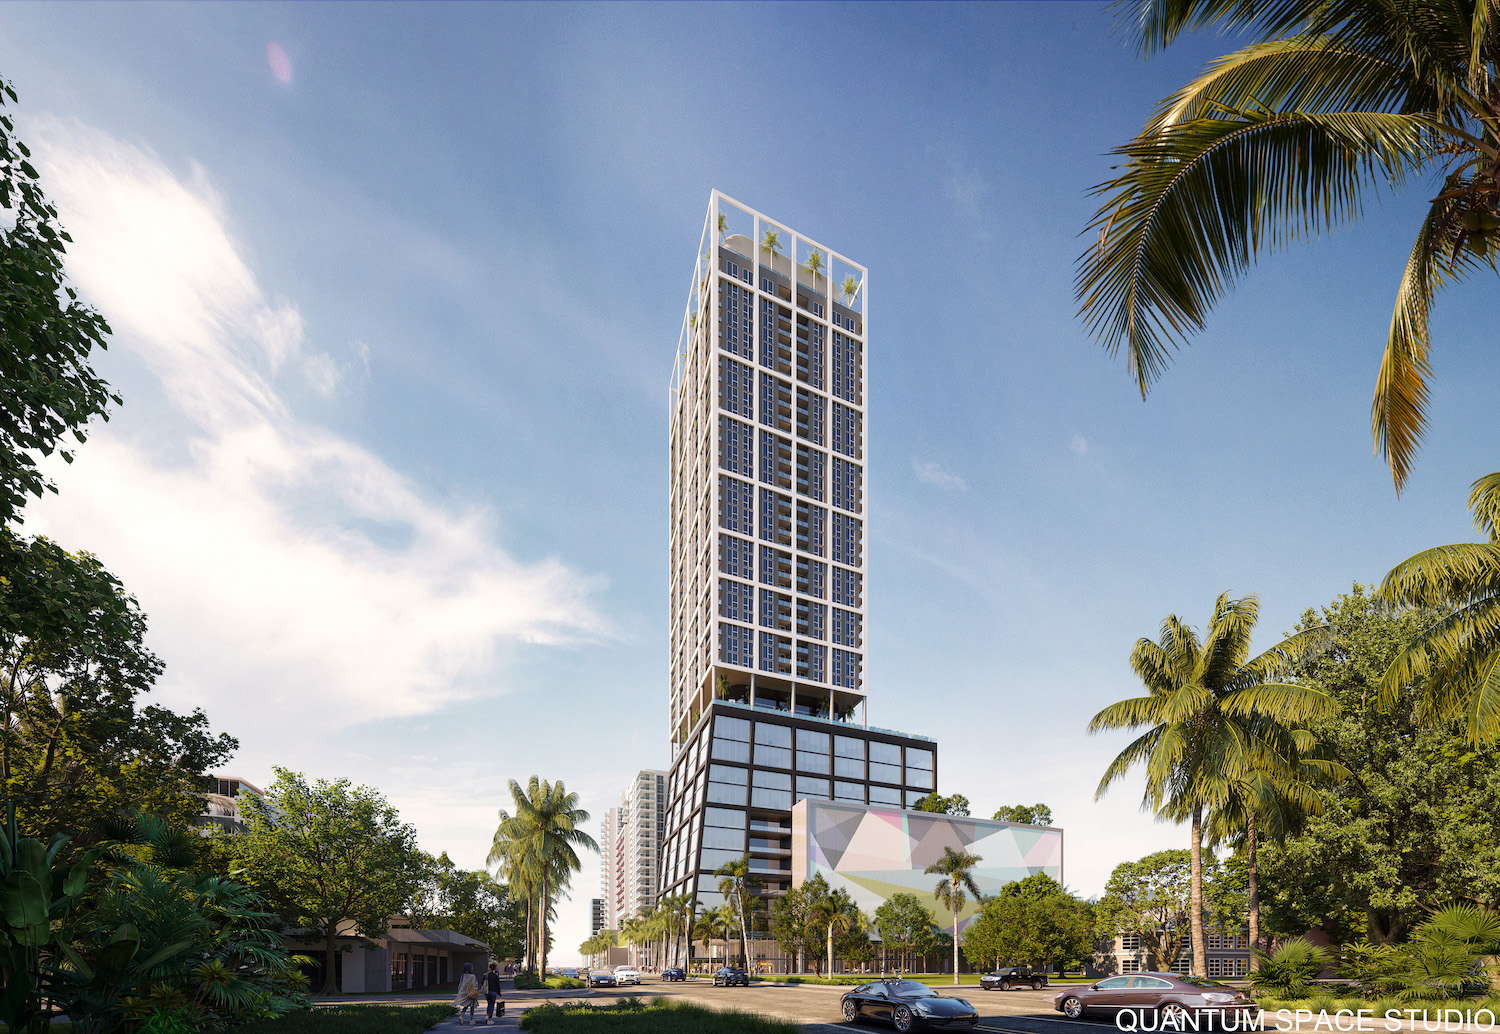 Oak Road Equities Announces Plans for a 40 Story Tower at 2600 Biscayne